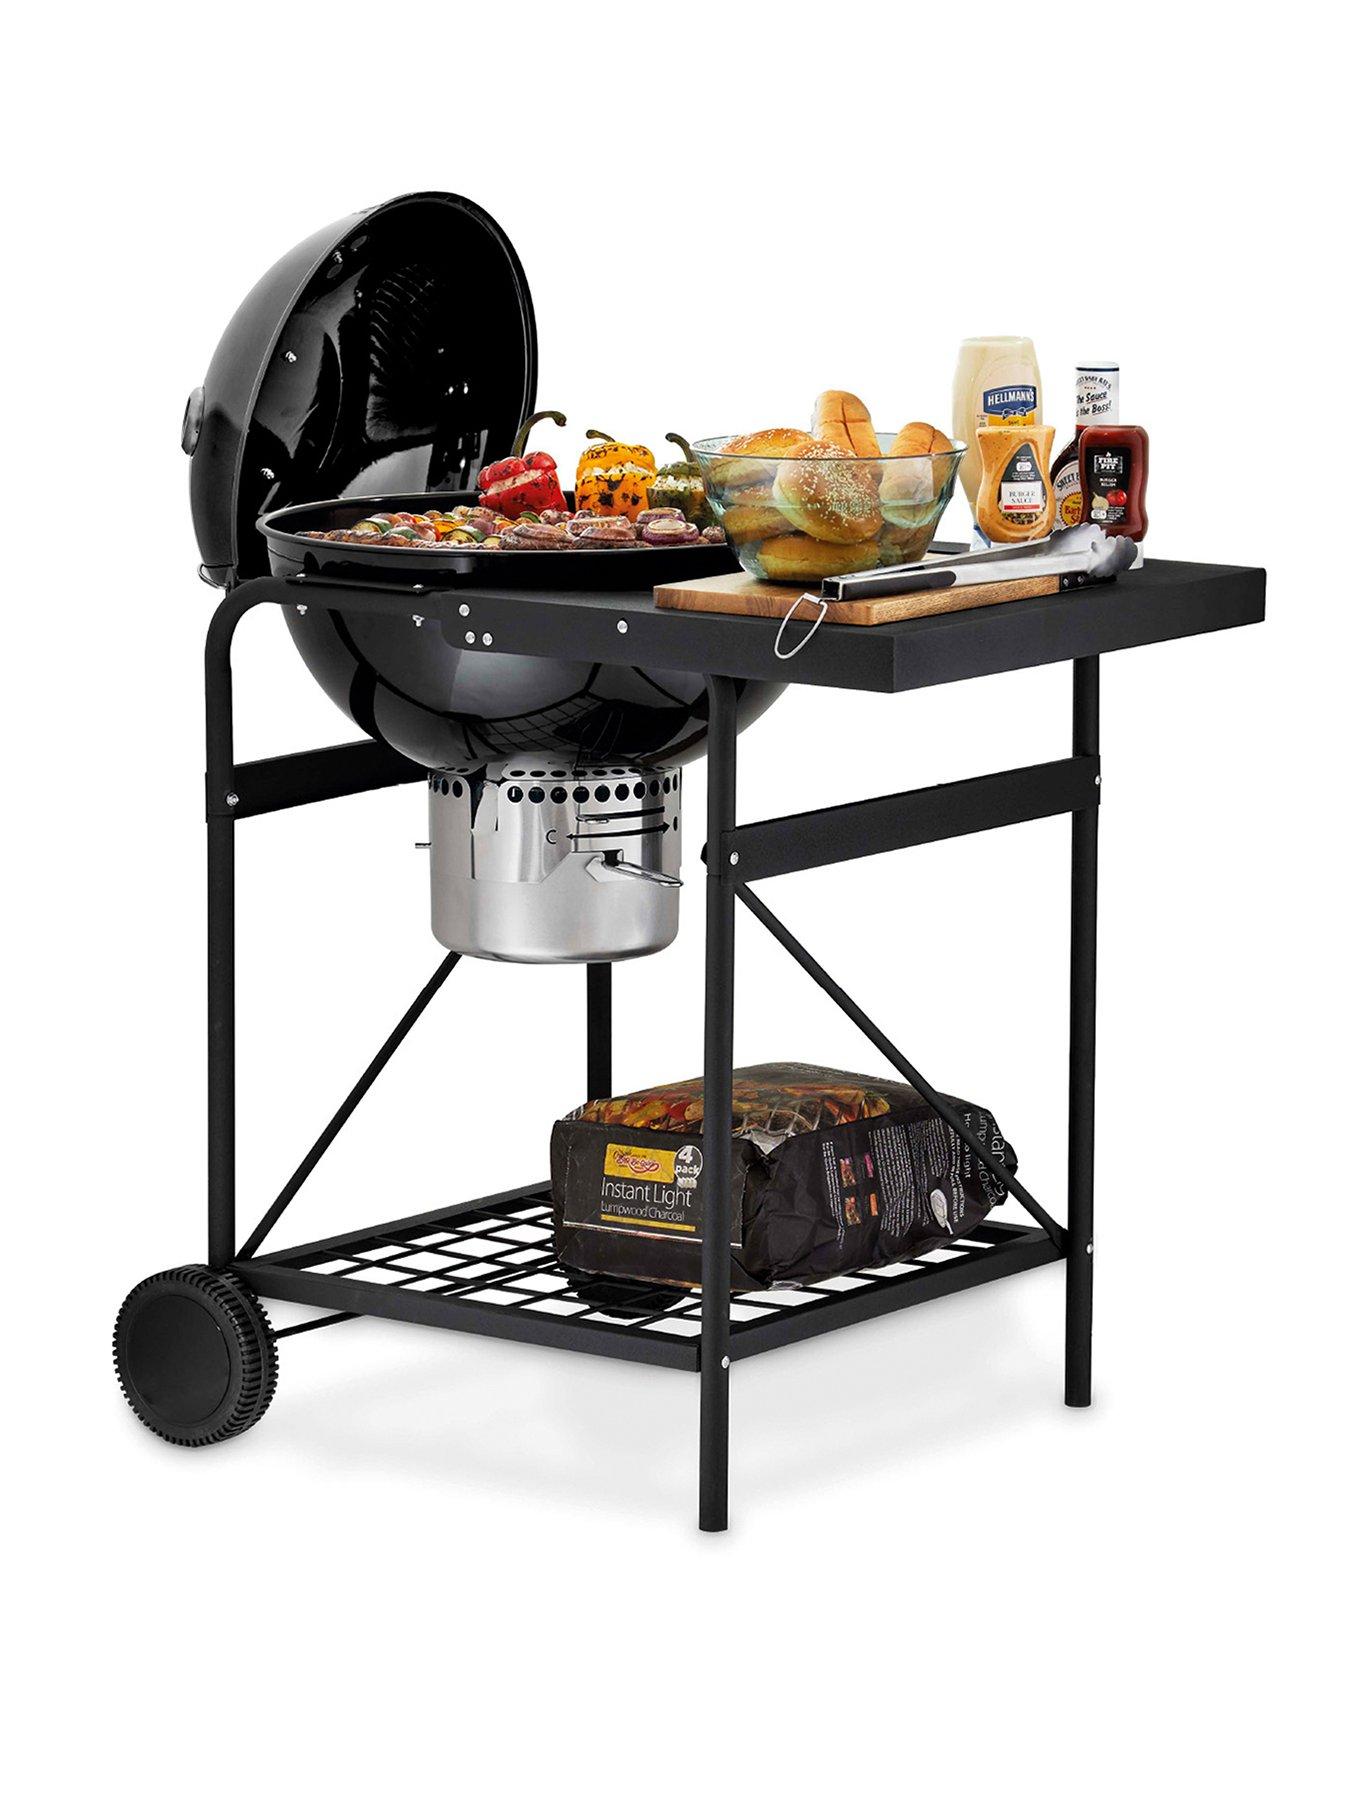 Tower Kettle Grill Bbq With Side Table